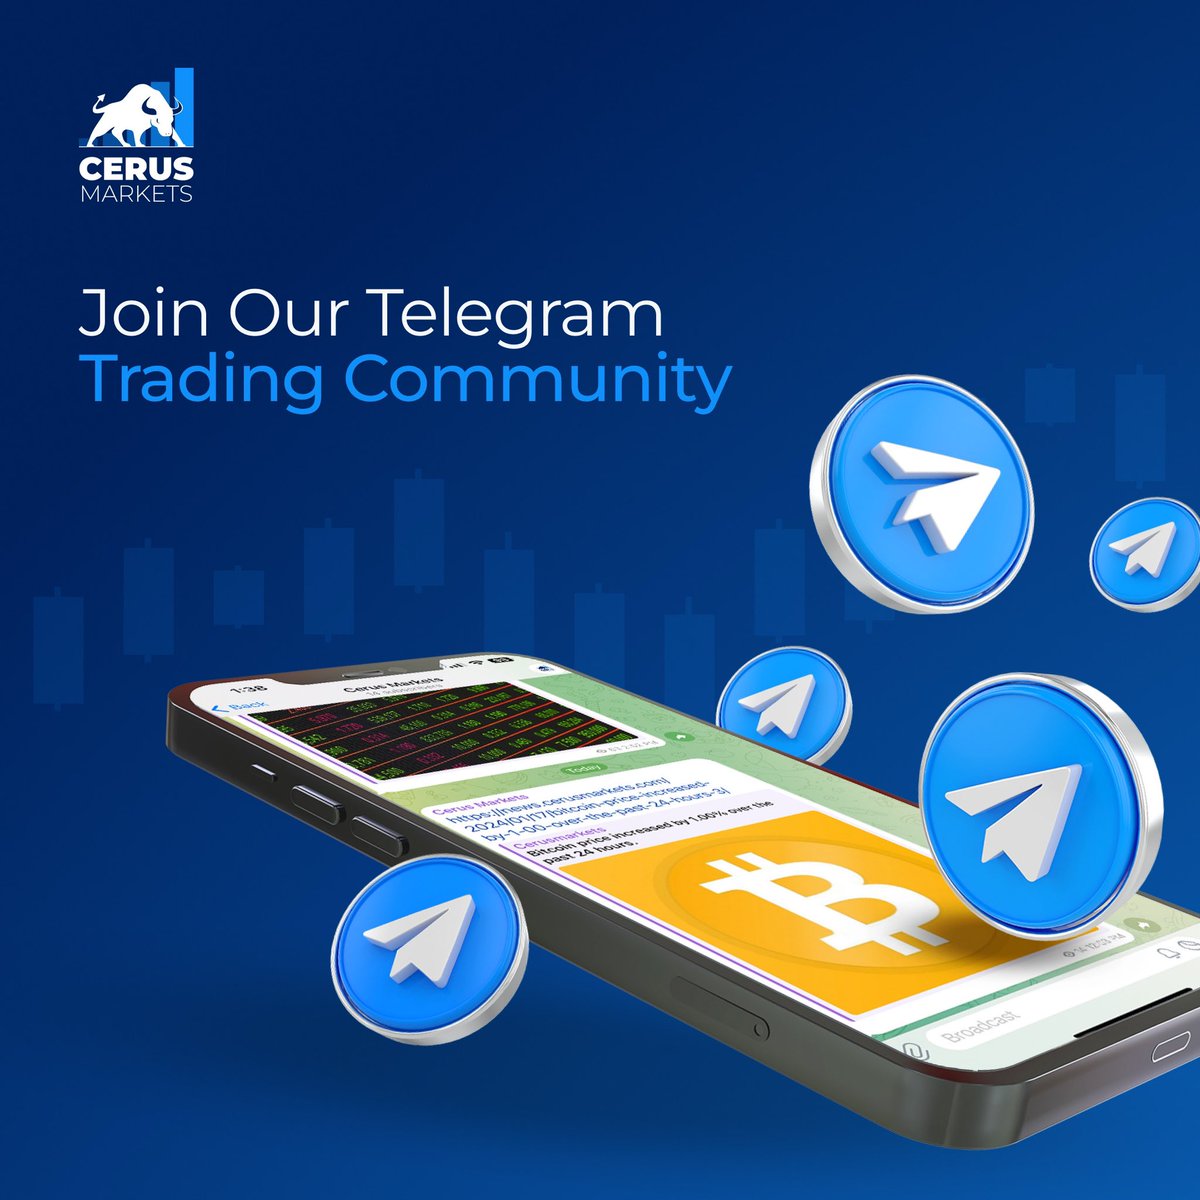 Join our Telegram trading community for daily market news, insights, and real-time discussions.🌐 

Connect with fellow traders and stay ahead in the financial world. 💬 

Click the link and join us now: t.me/cerusmarkets_g… 

#CerusMarketsCommunity #TradingTogether…